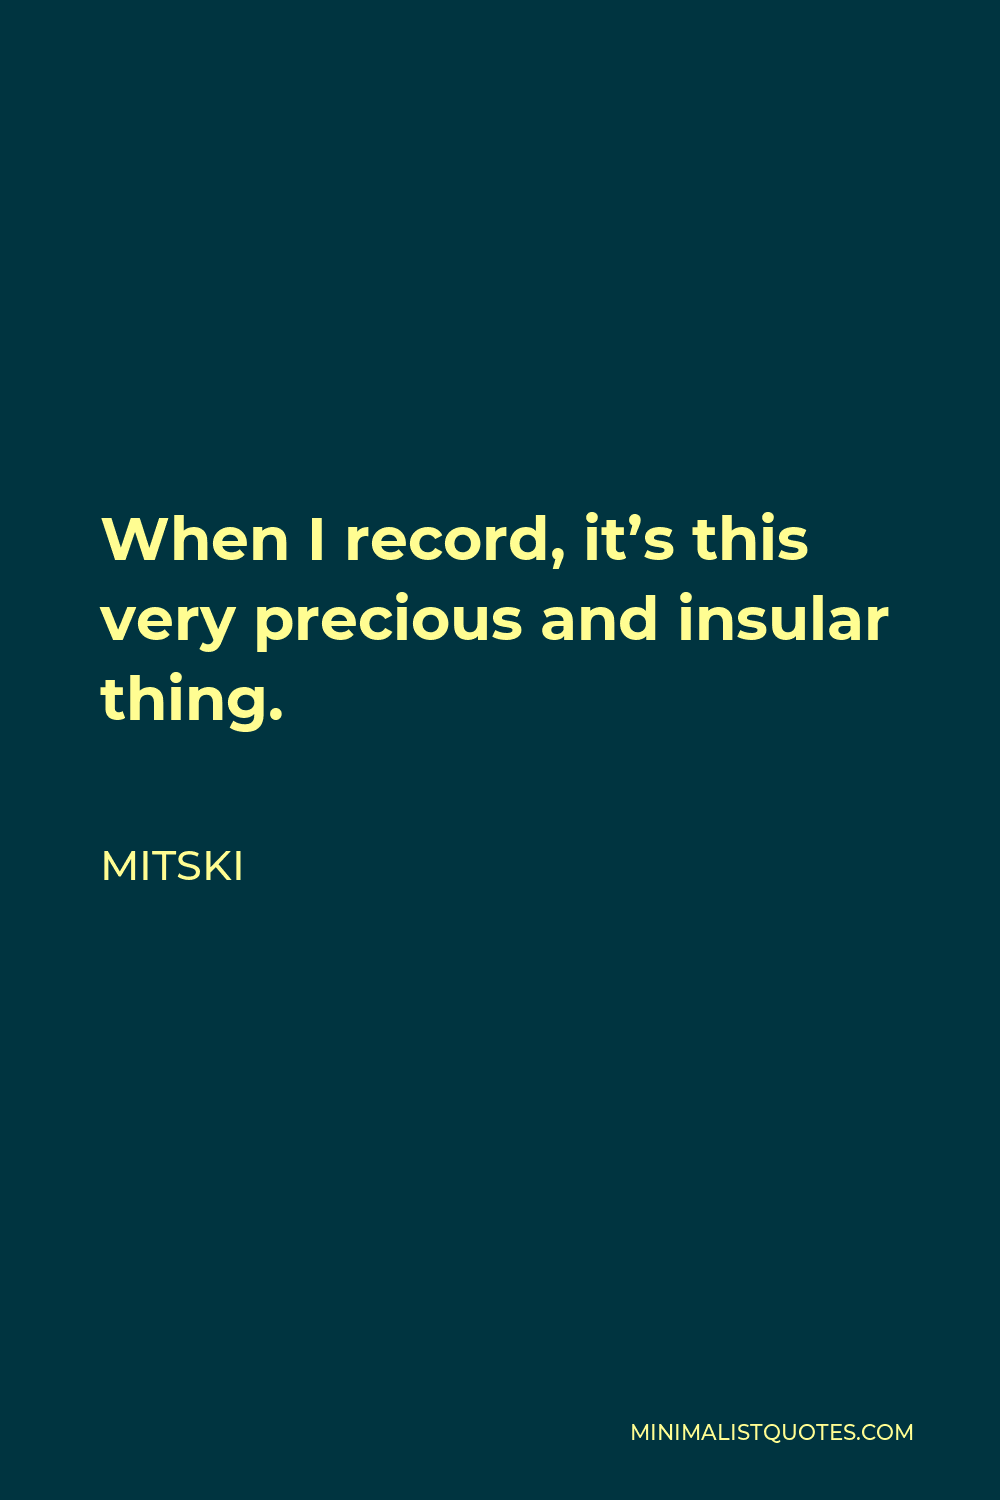 Mitski Quote - When I record, it’s this very precious and insular thing.